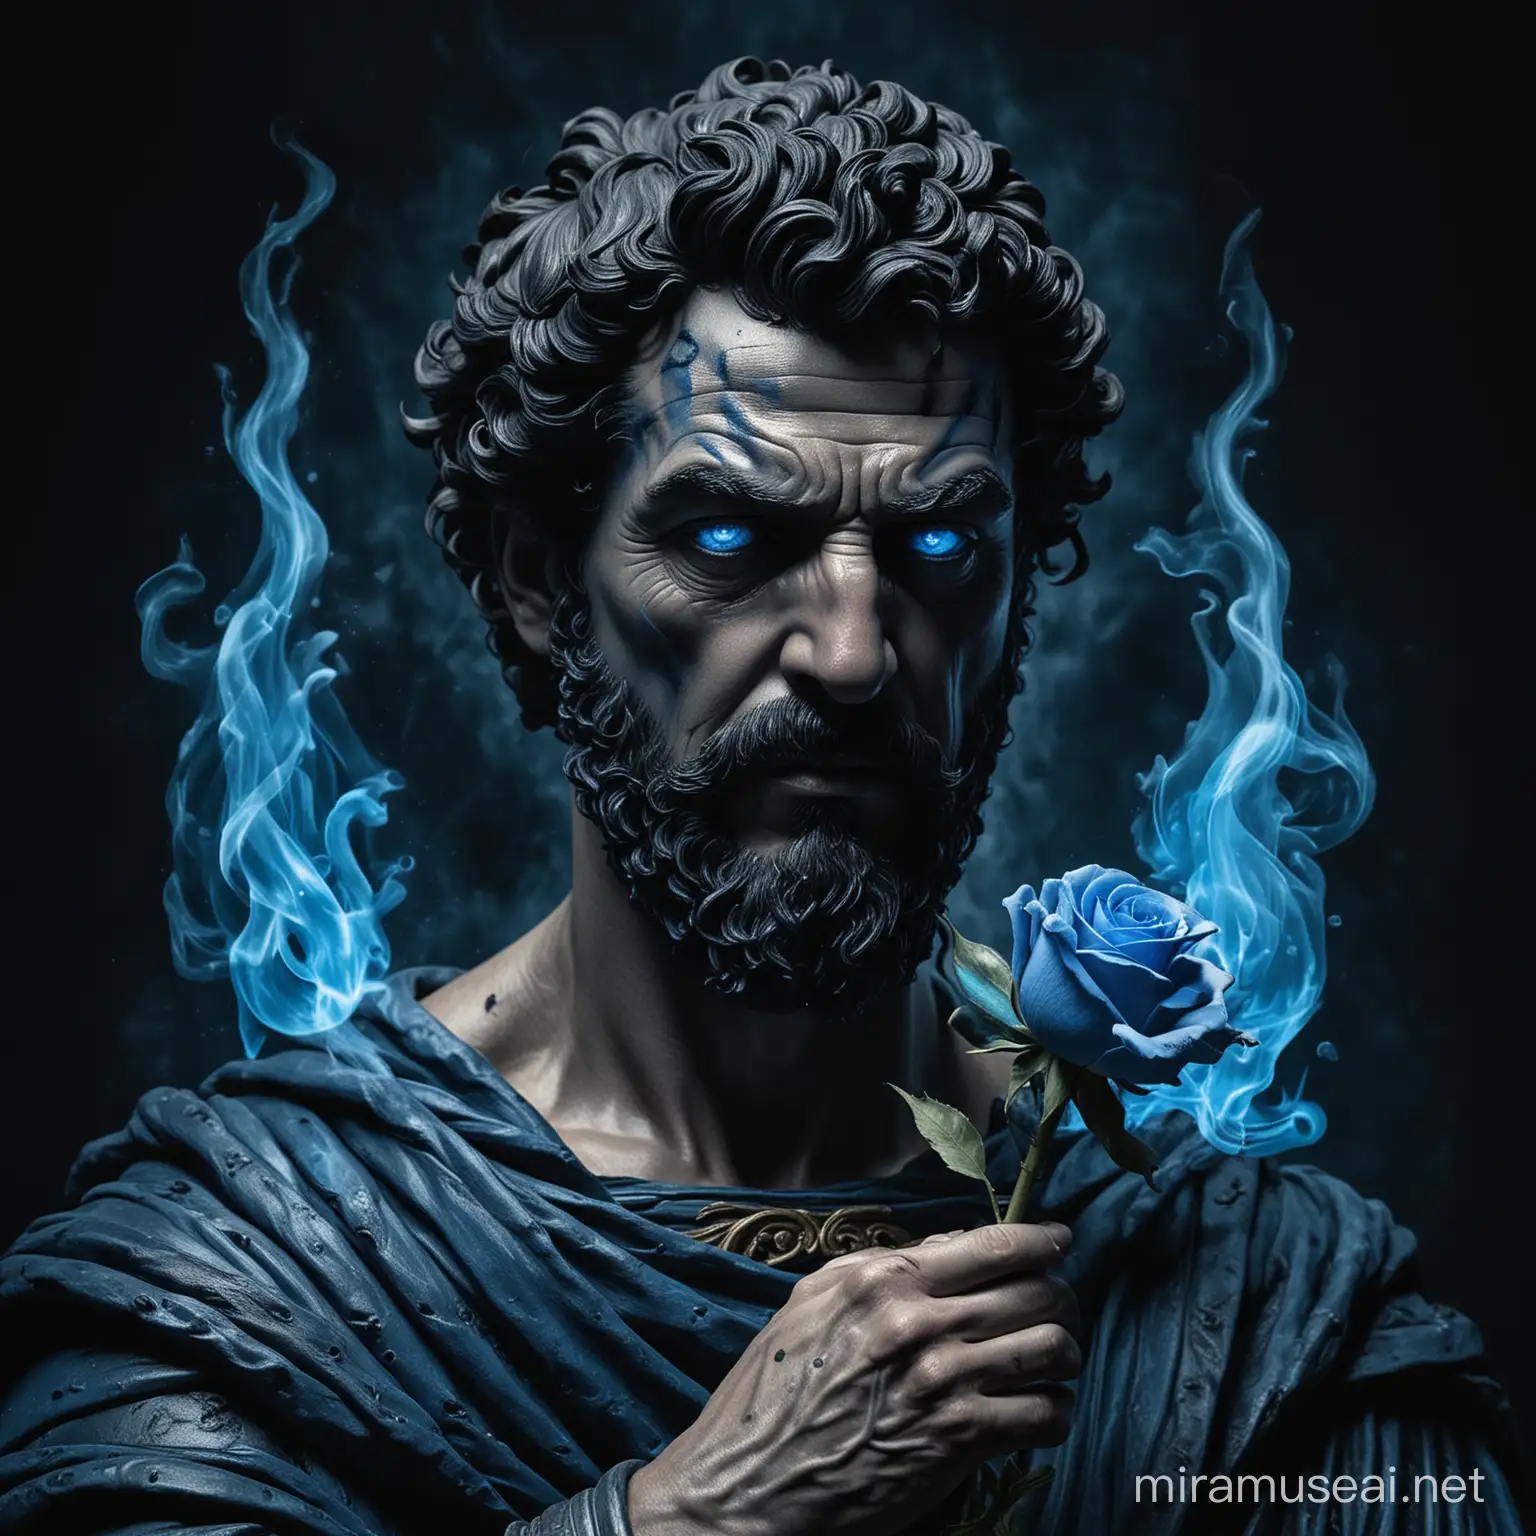 Furious Marcus Aurelius with Blue Rose Amidst Fiery Blue Flames